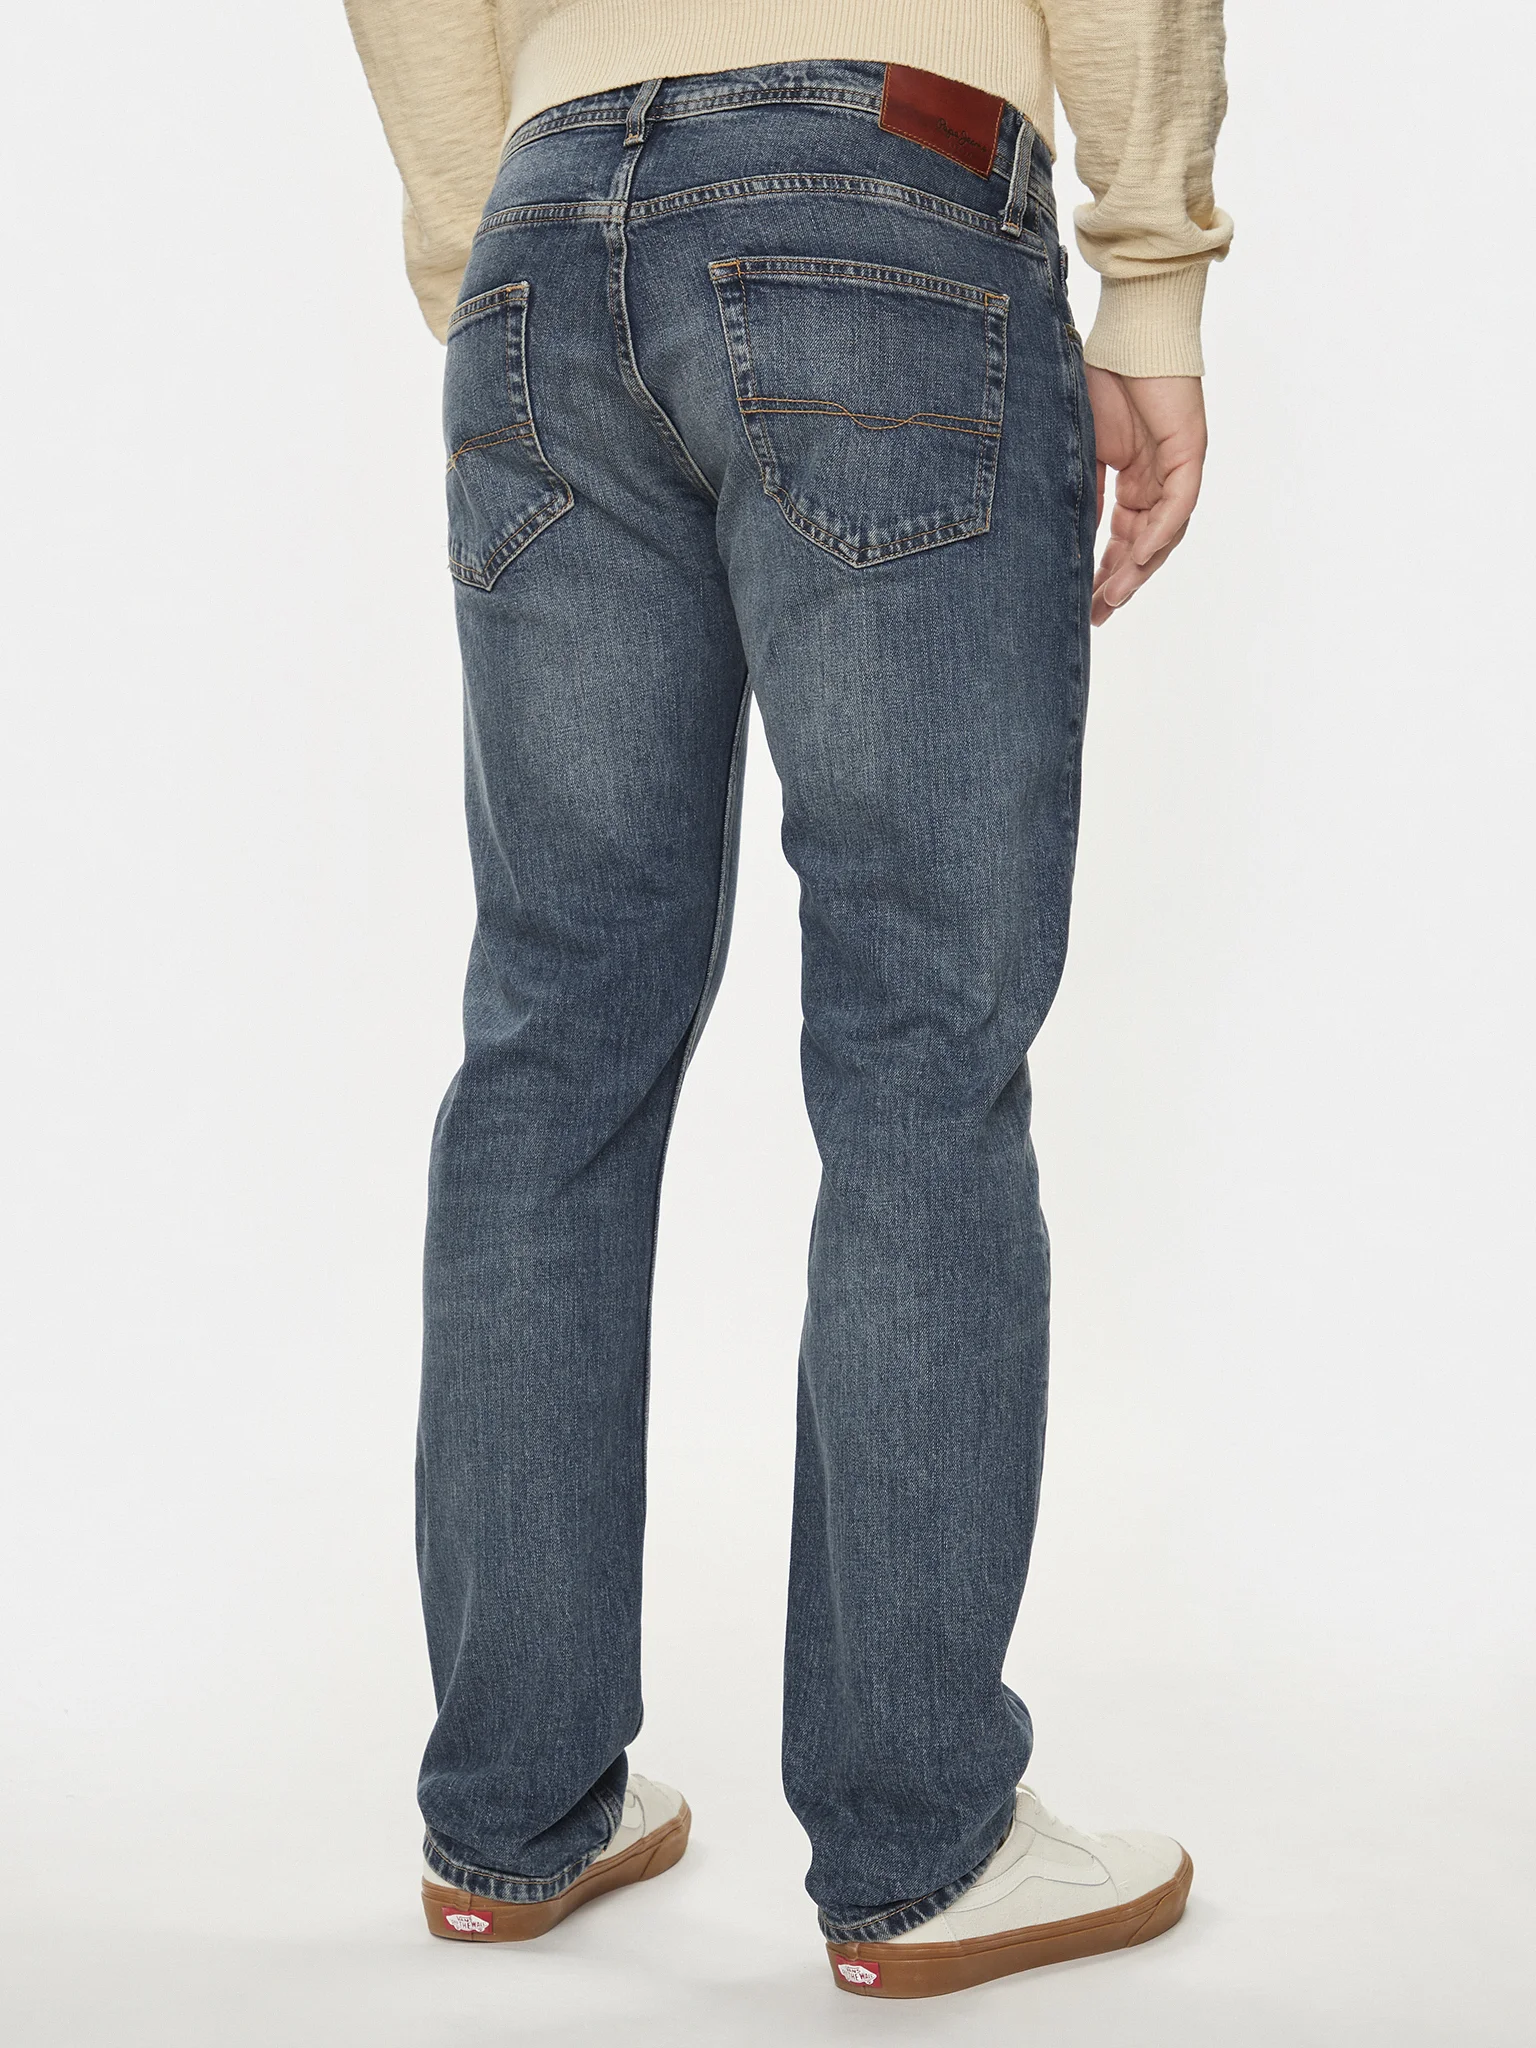 pepe jeans tzin pm207393 mple straight fit 0000304414299 2 tobros.gr